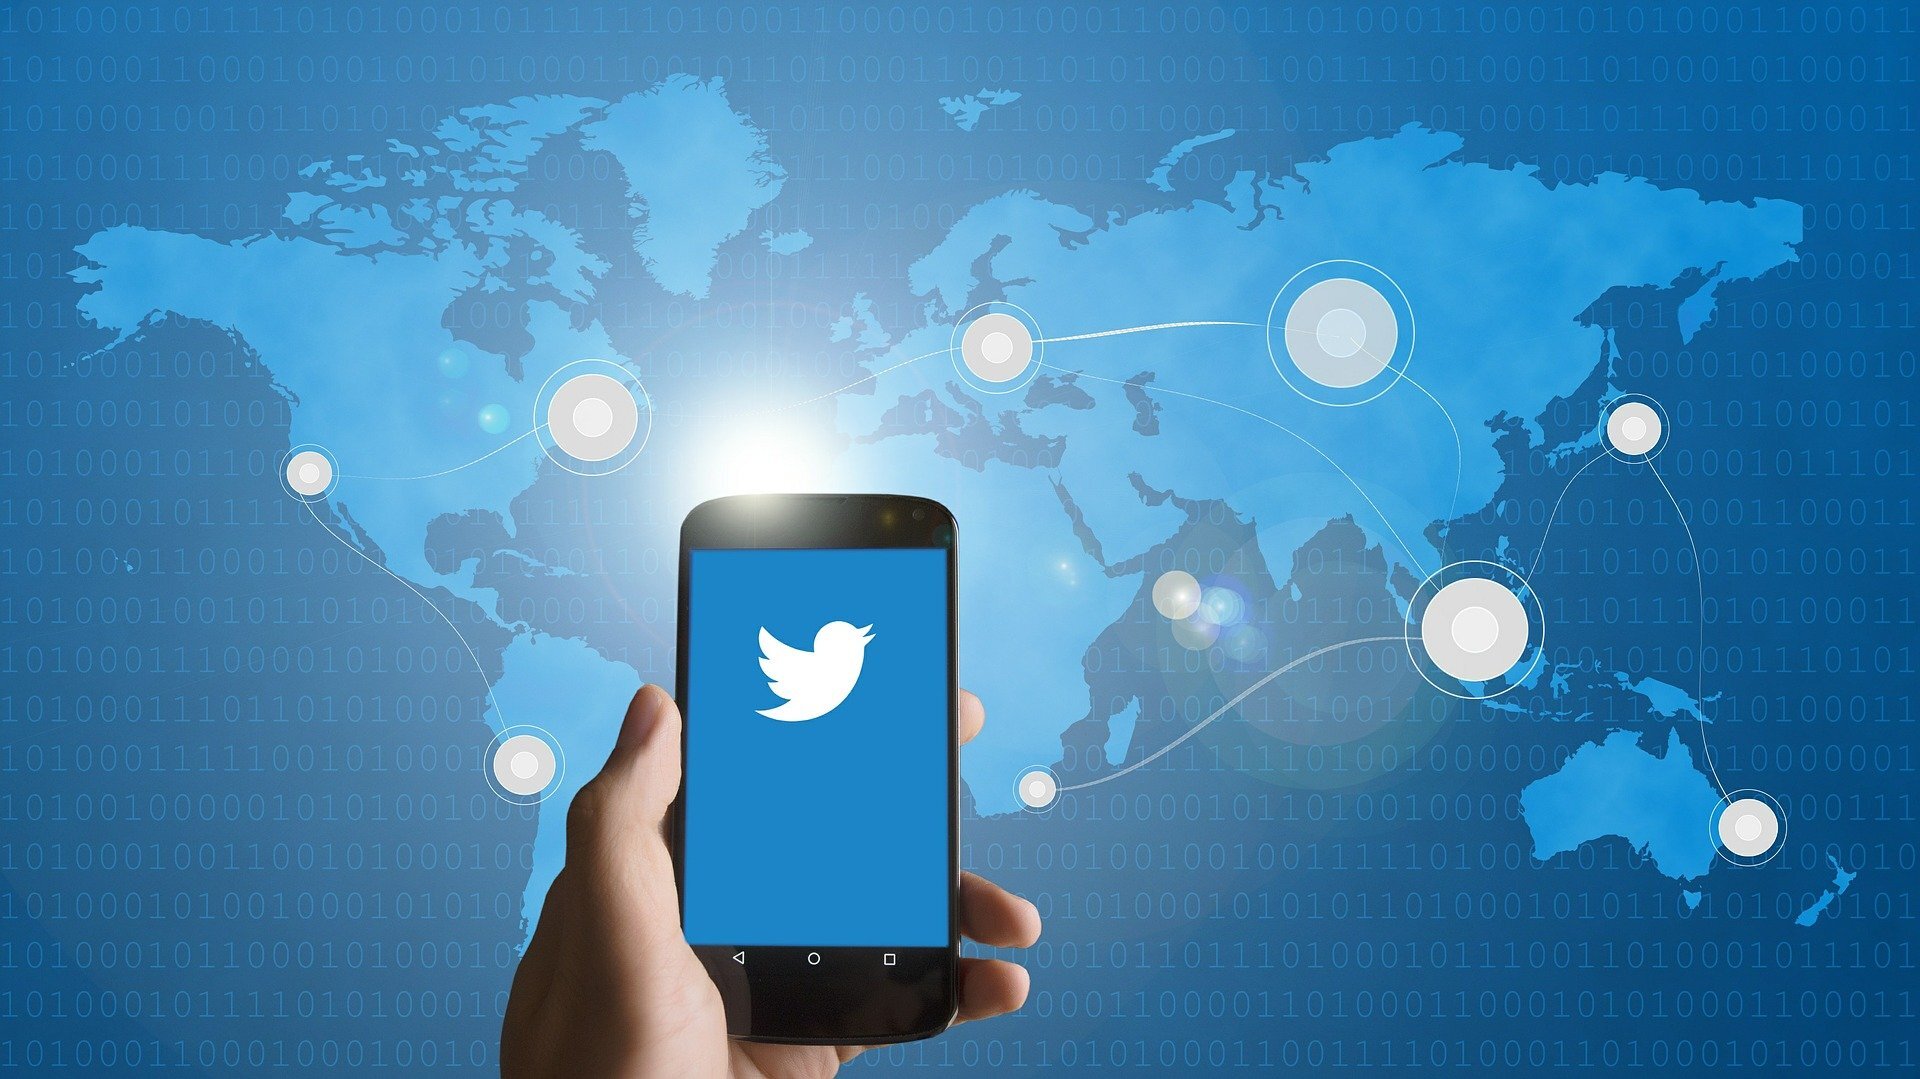 Twitter was at the forefront of content moderation. What comes next?